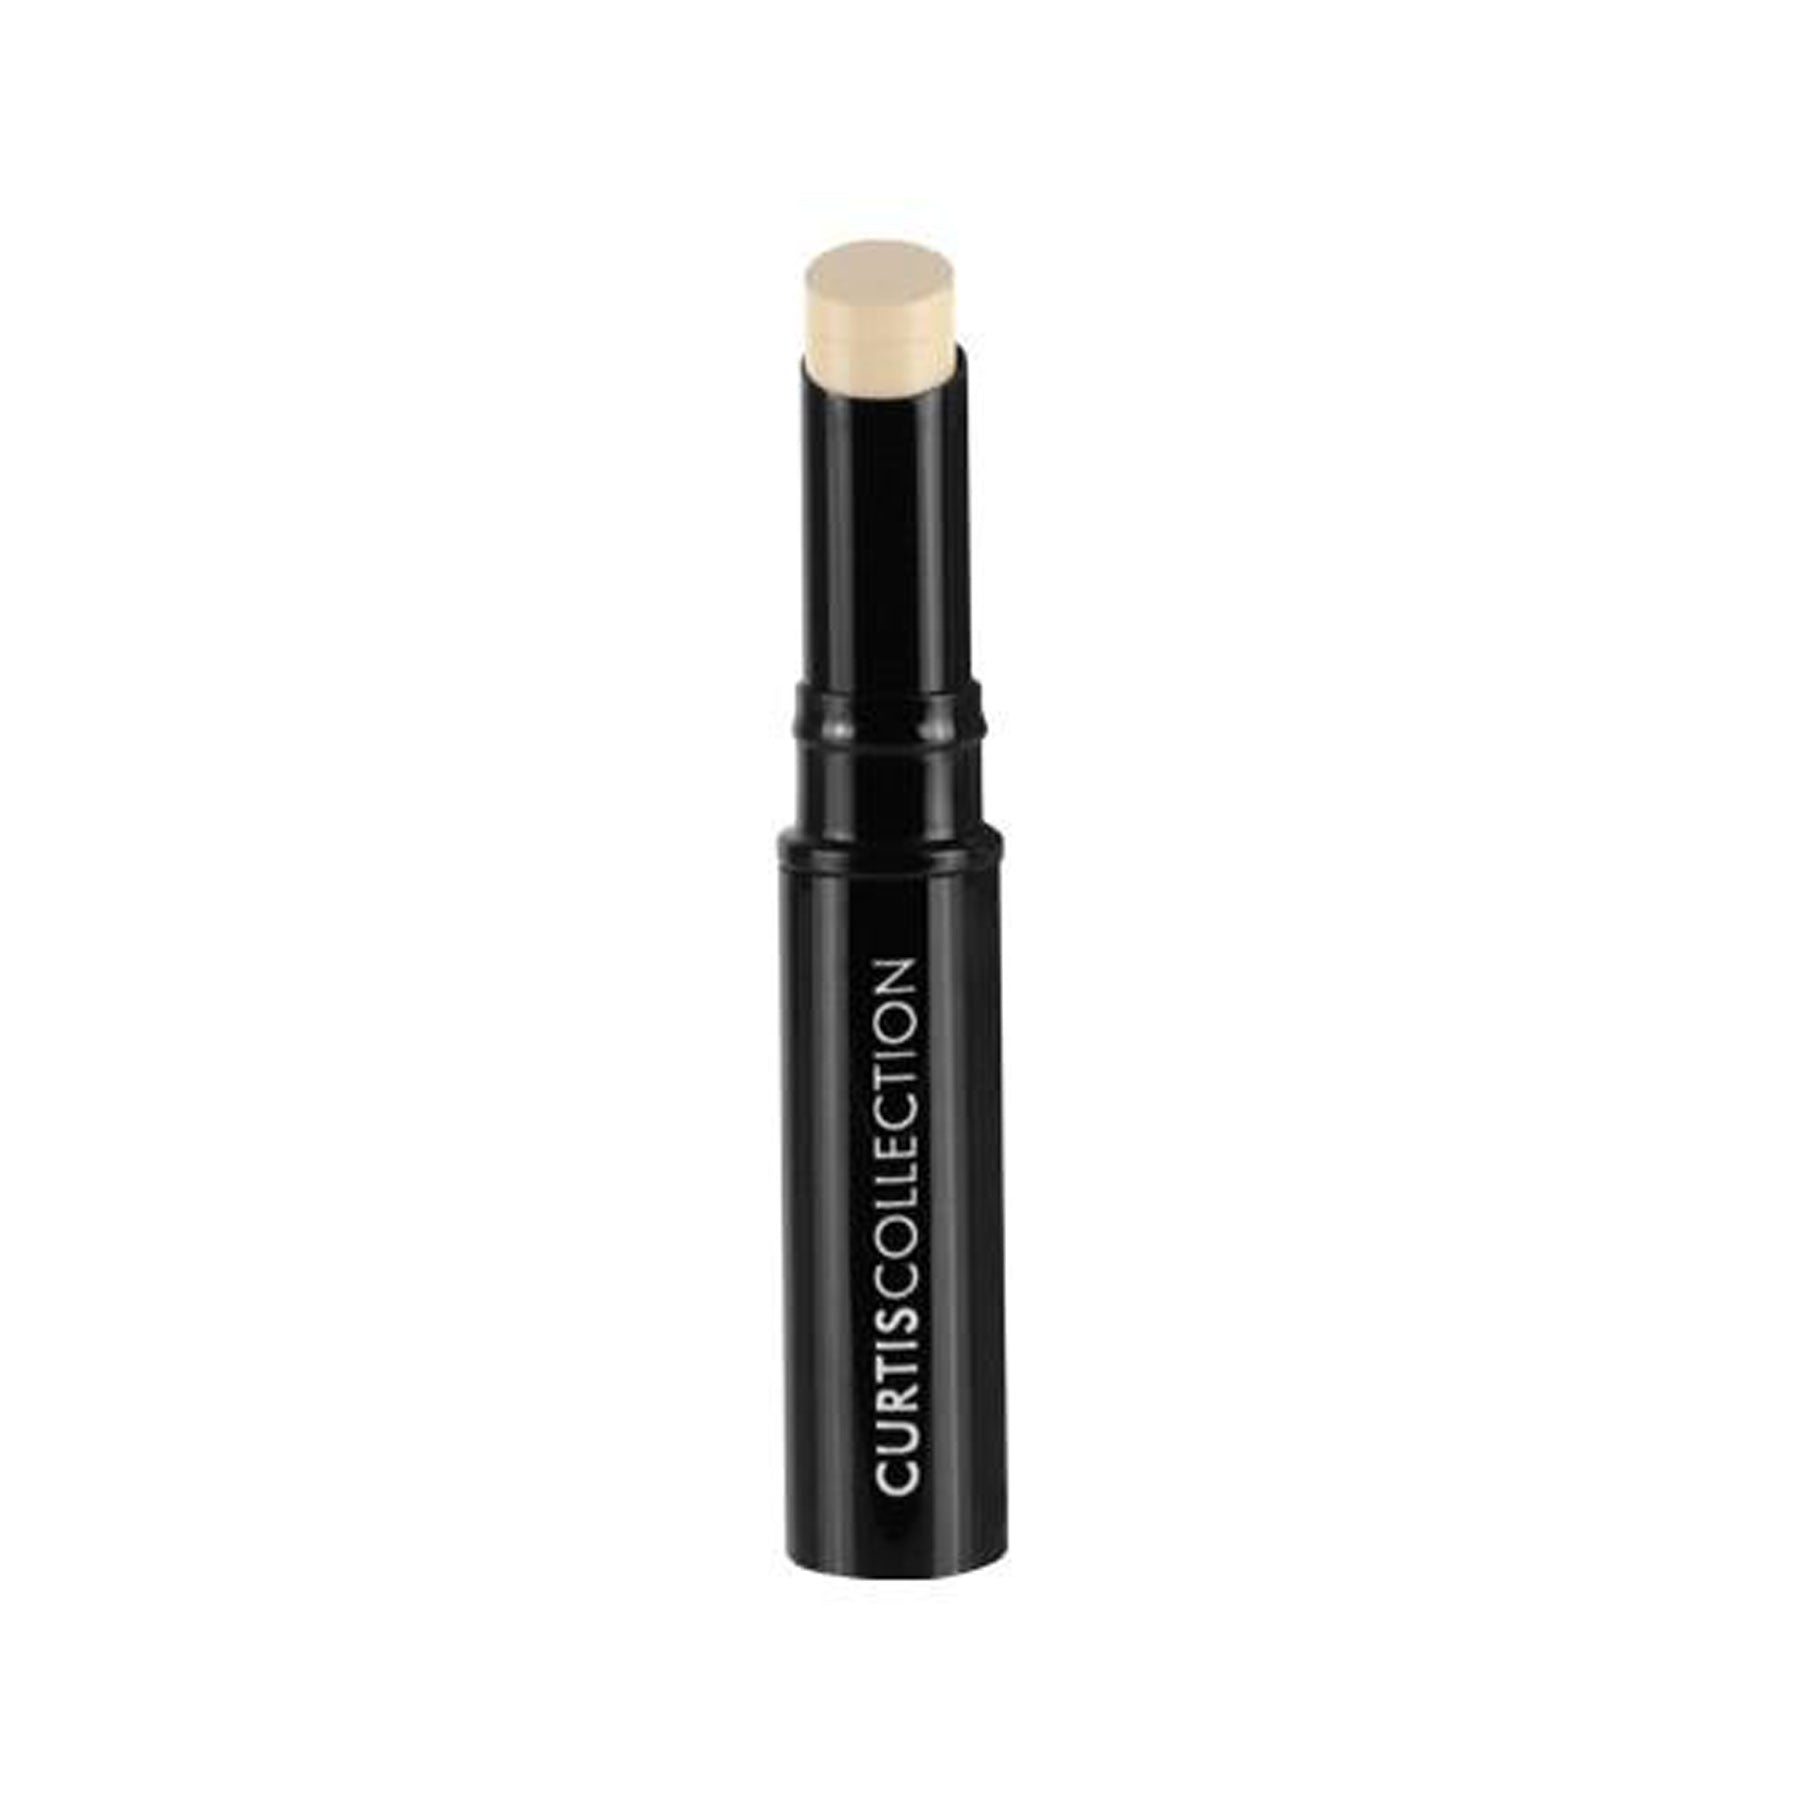 Airbrush Finish Mineral Concealer